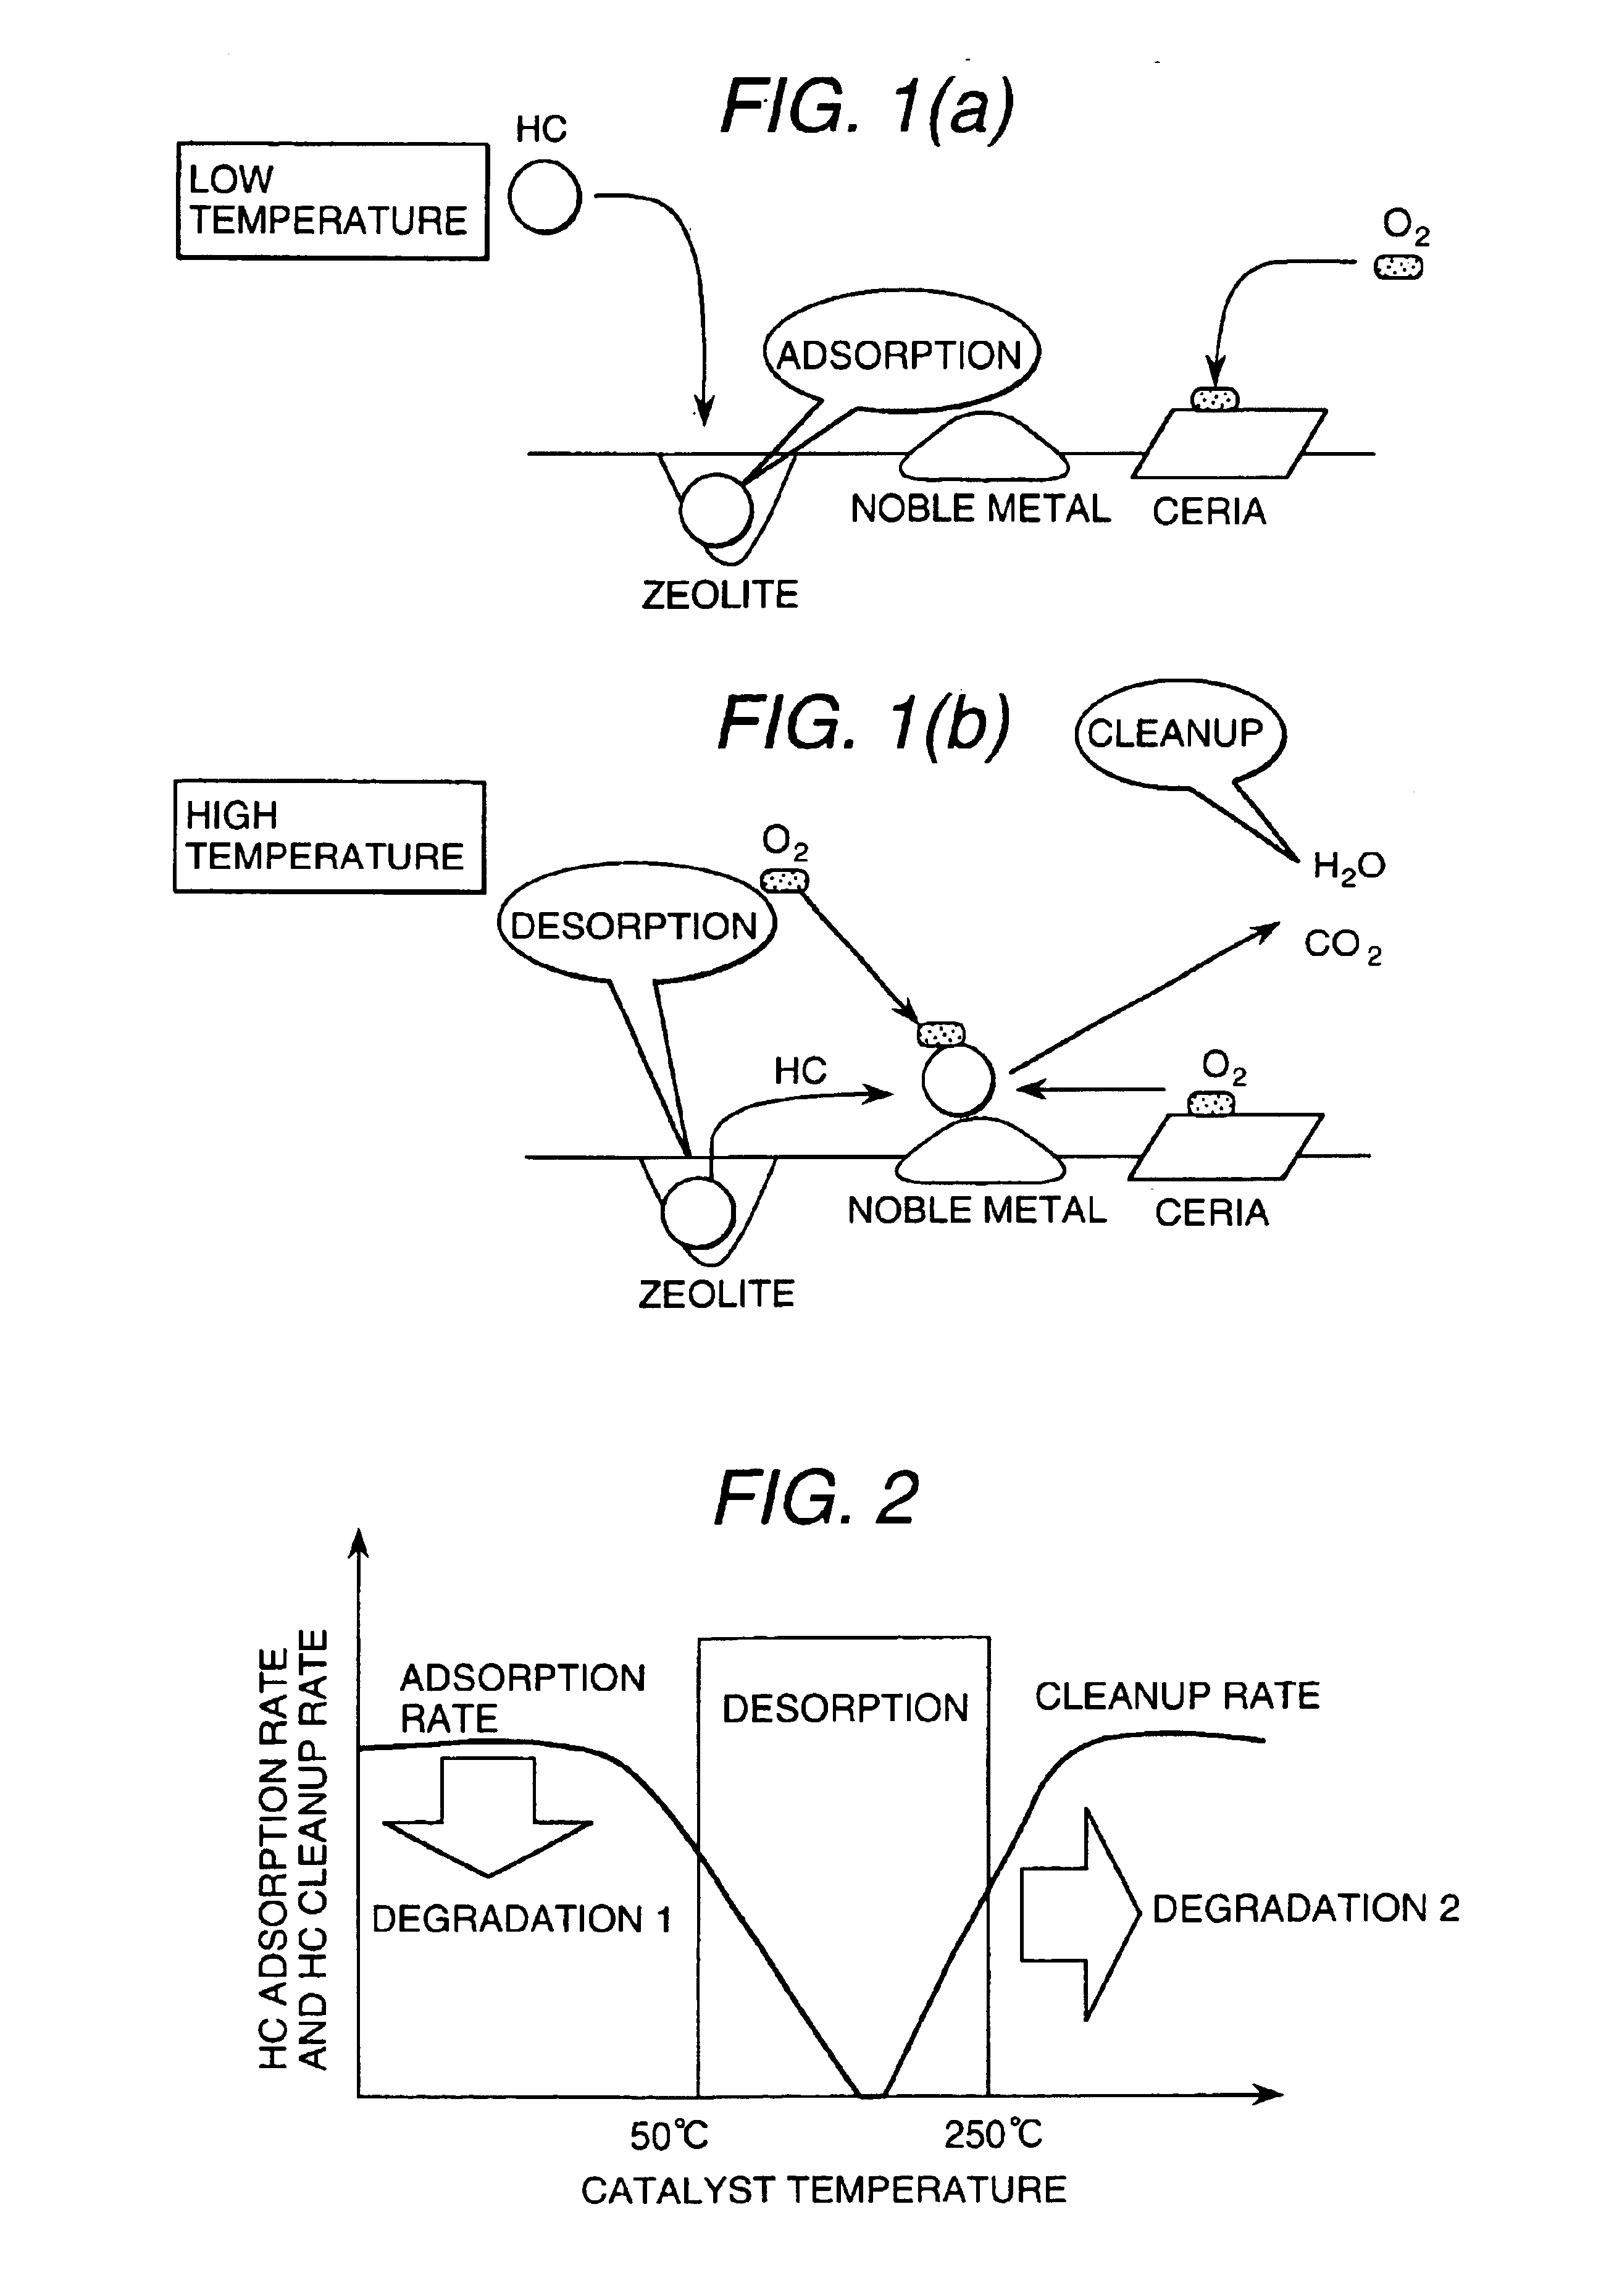 Diagnosis apparatus for internal combustion engine